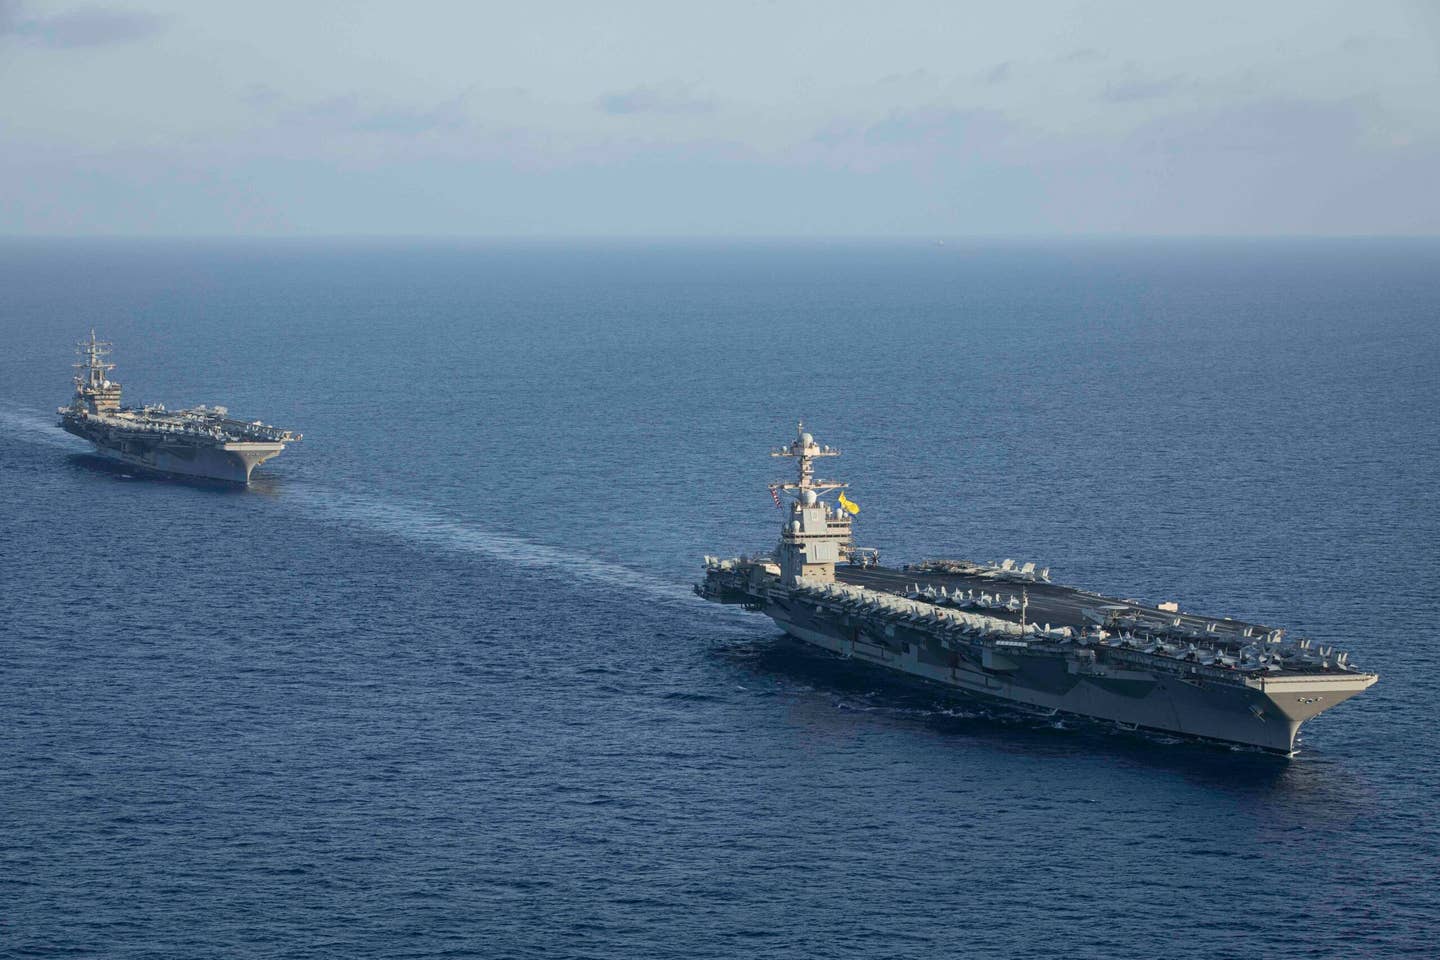 The world’s largest aircraft carrier<em> USS Gerald R. Ford</em> (CVN 78) steams in formation with the <em>Nimitz</em>-class aircraft carrier <em>USS Dwight D. Eisenhower</em> (CVN 69) during a photo exercise, Nov. 3, 2023.  (U.S. Navy photo by Mass Communication Specialist 2nd Class Malachi Lakey)